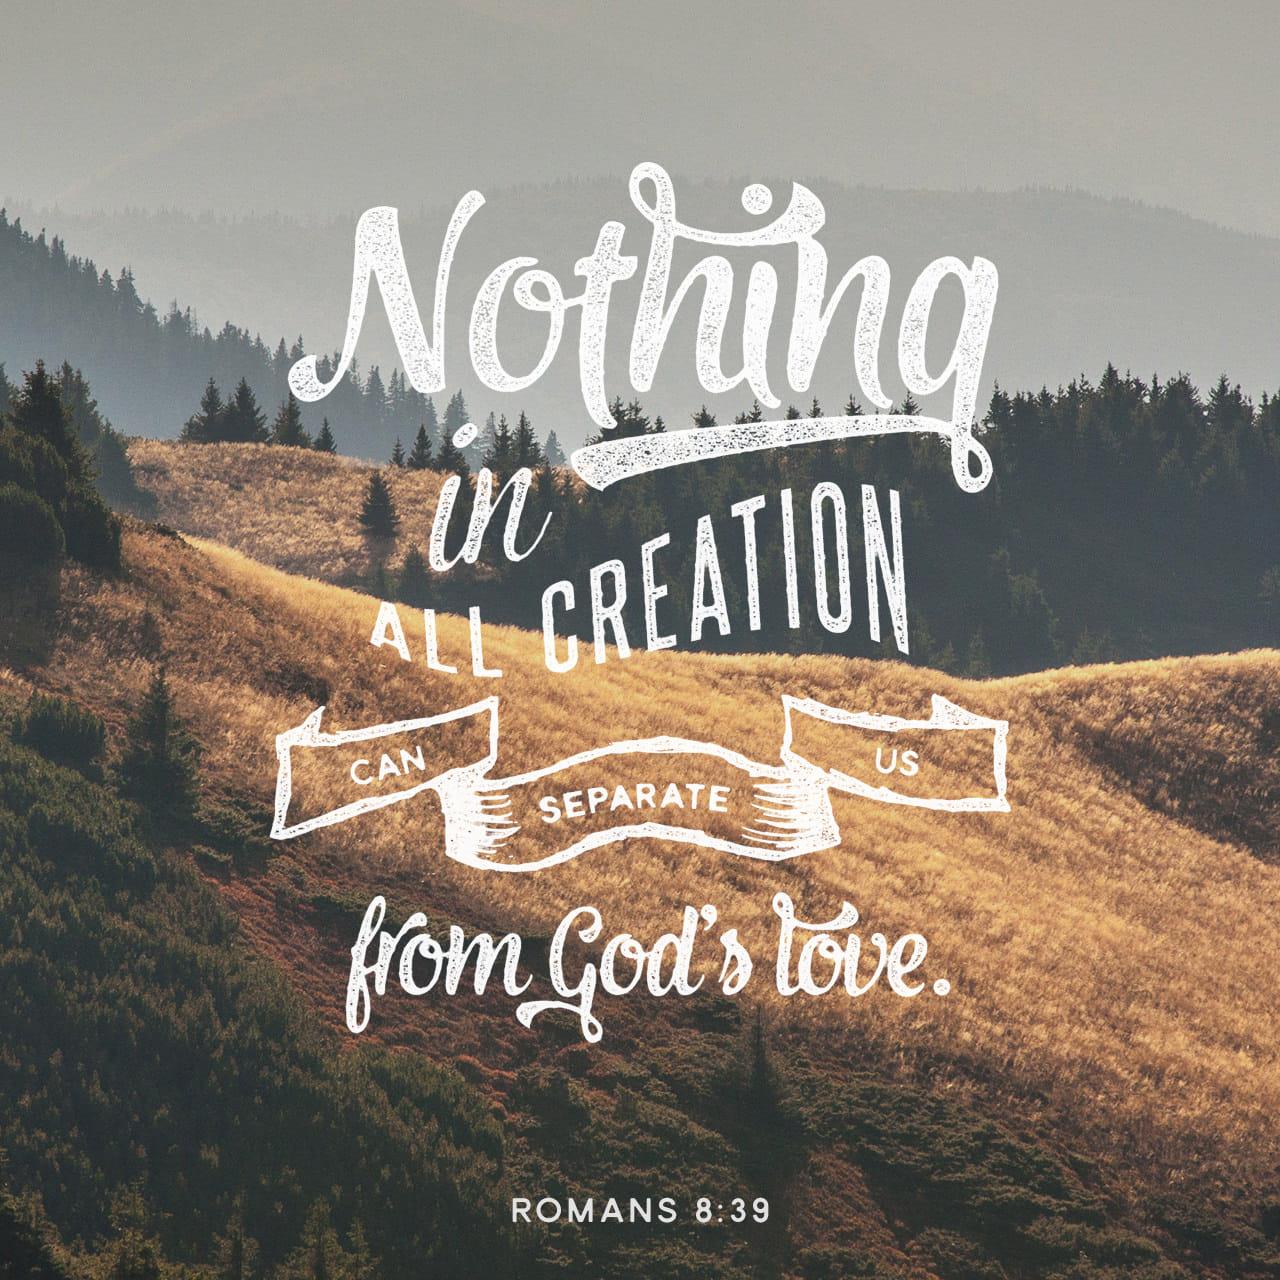 Bible Verse of the Day - day 161 - image 513 (Romans 8:38-39)